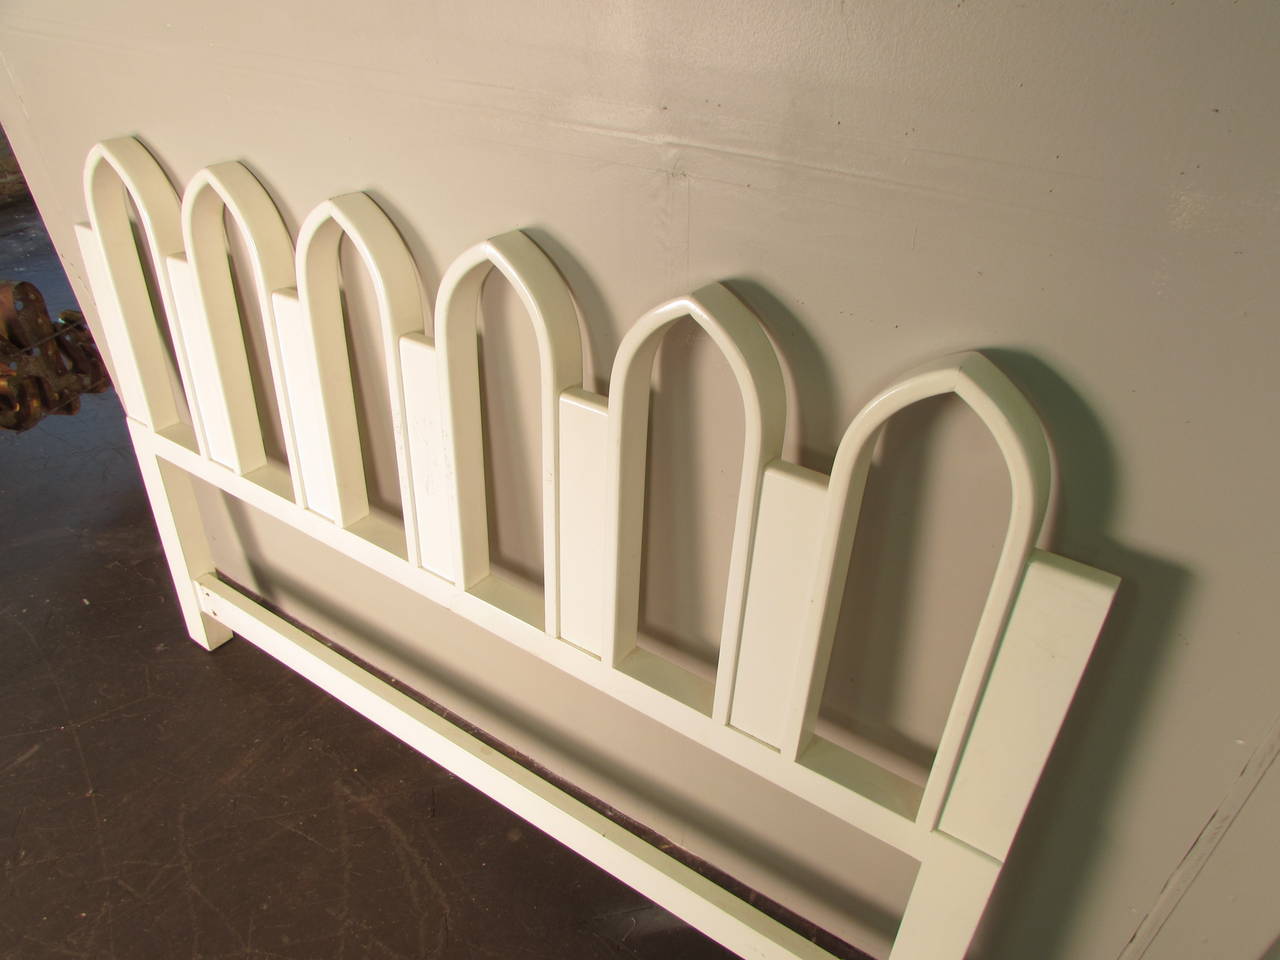 White lacquered headboard with Gothic arch detail by Harvey Probber, 1965. Headboard is wide enough for a 60" queen-sized mattress but was used for a full-sized mattress. Condition is excellent. 